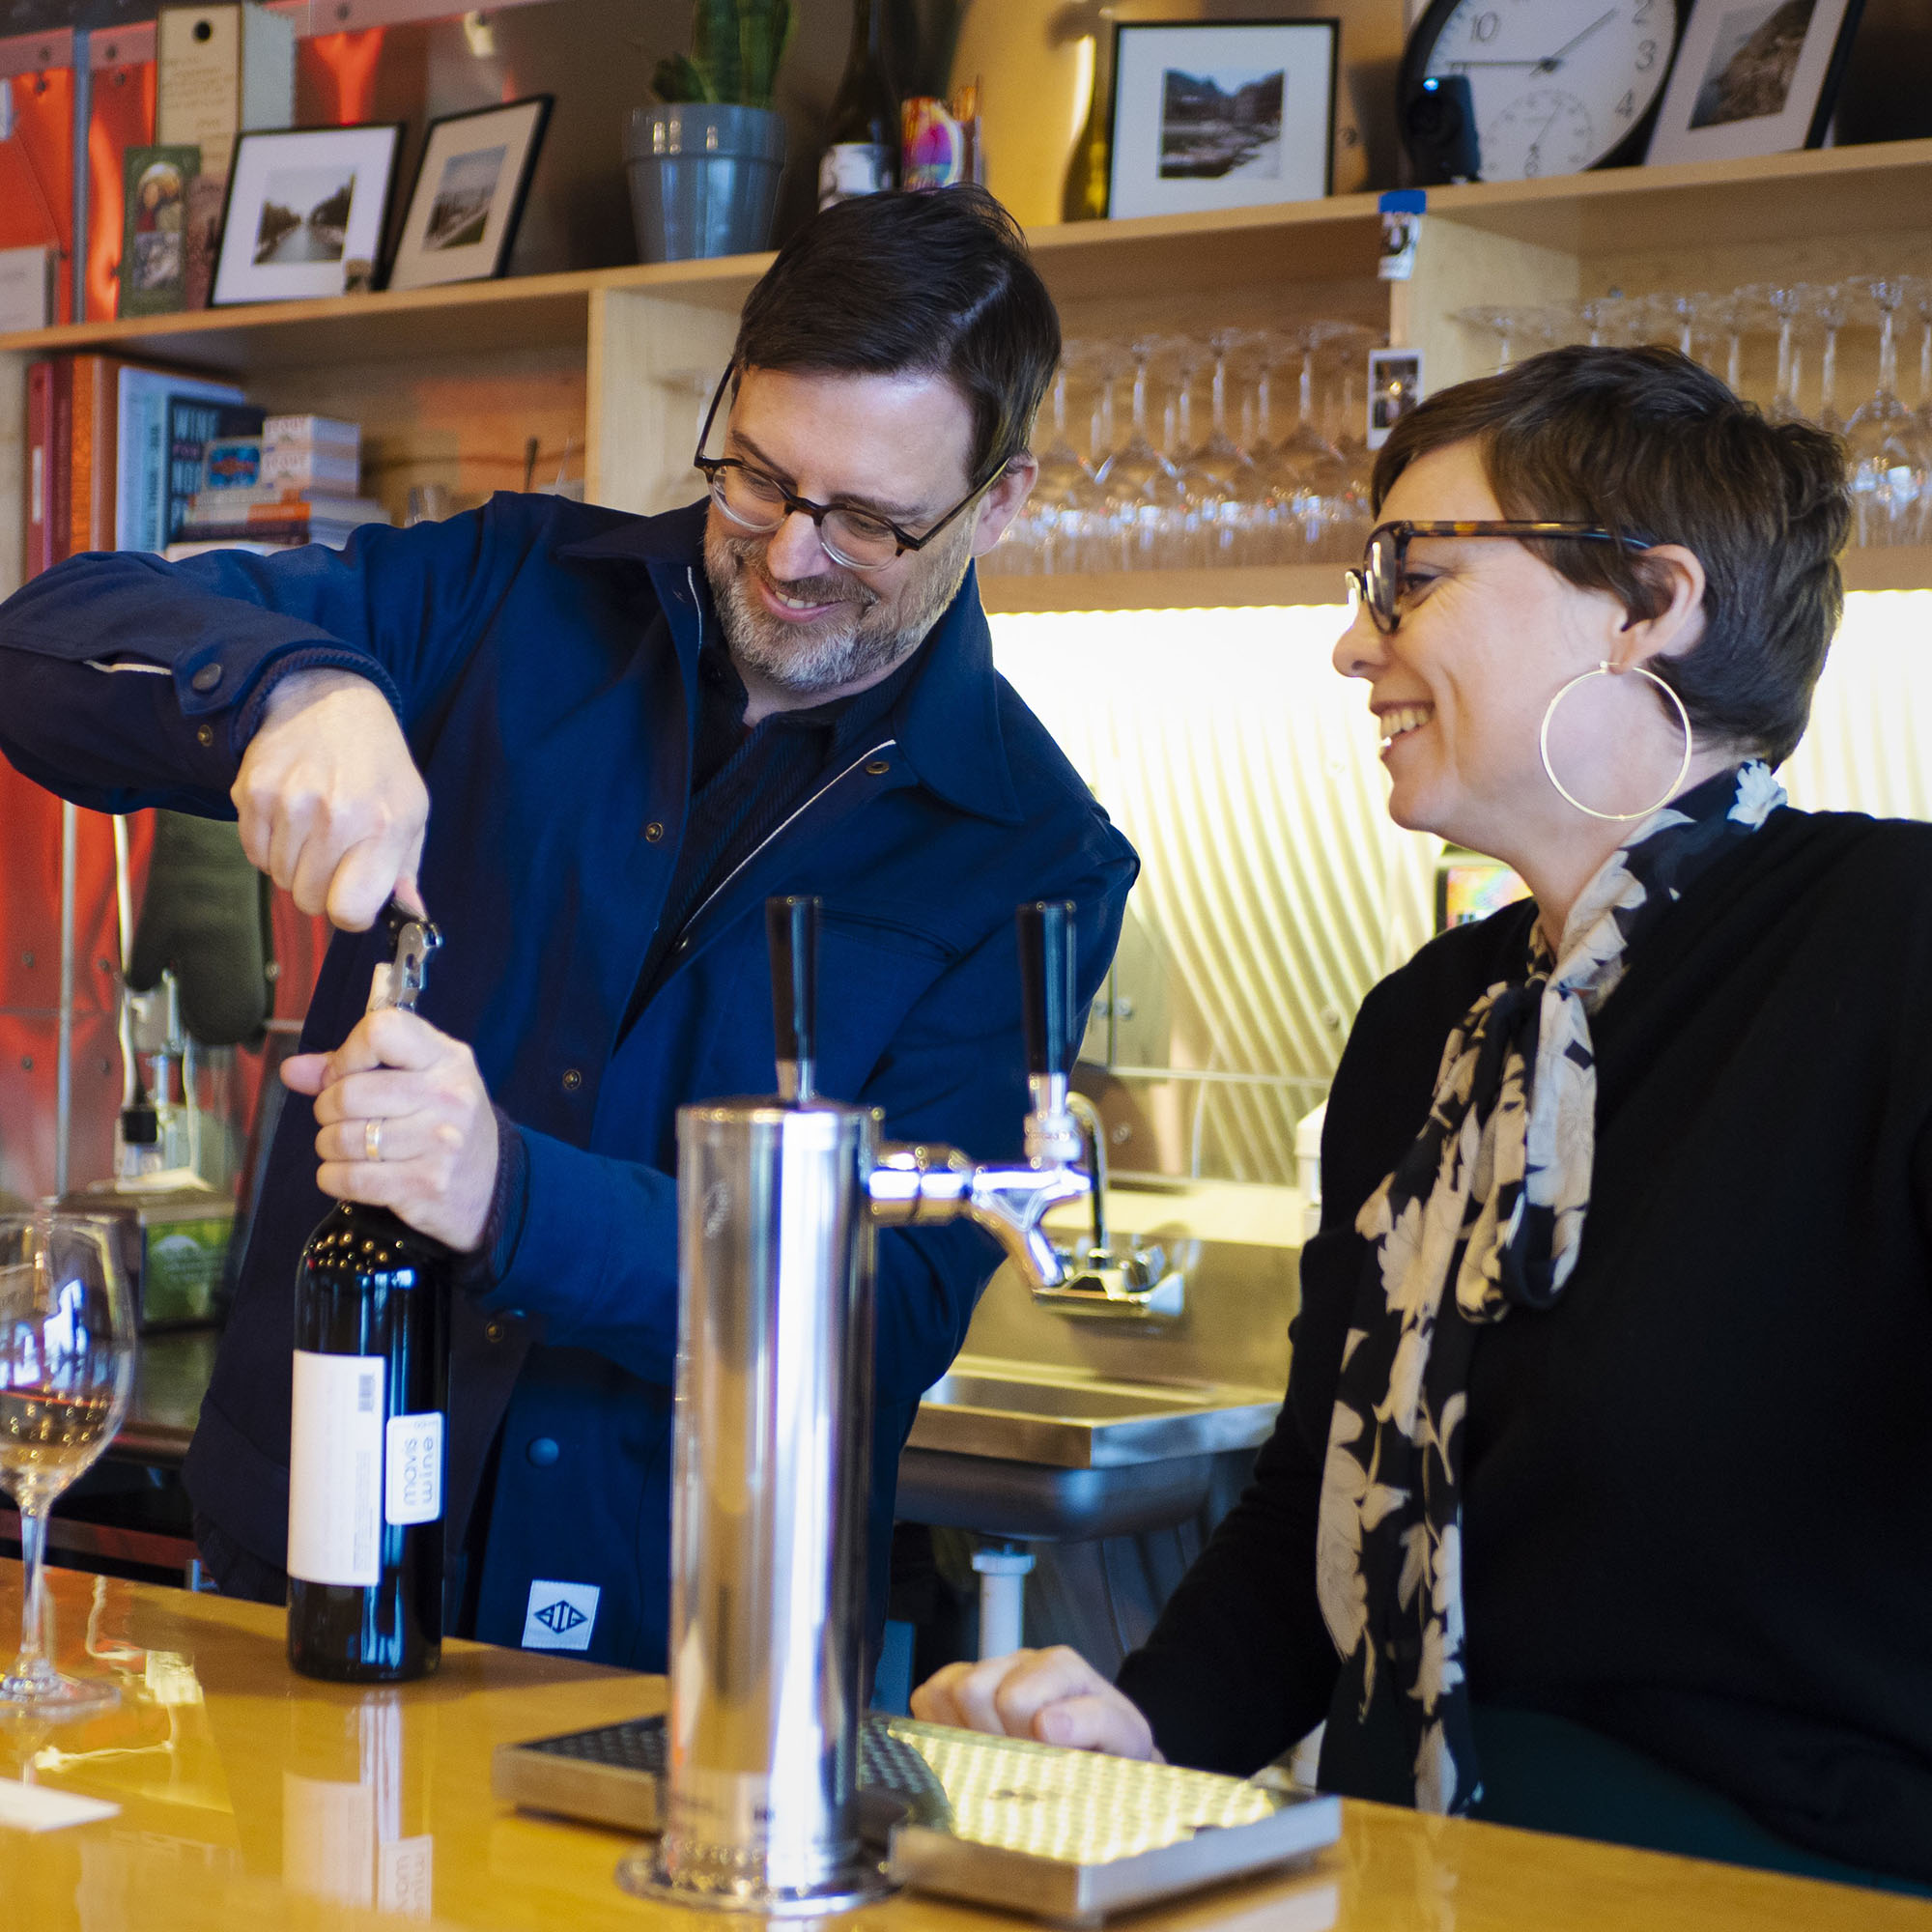 Know the News - From show biz to natural wine